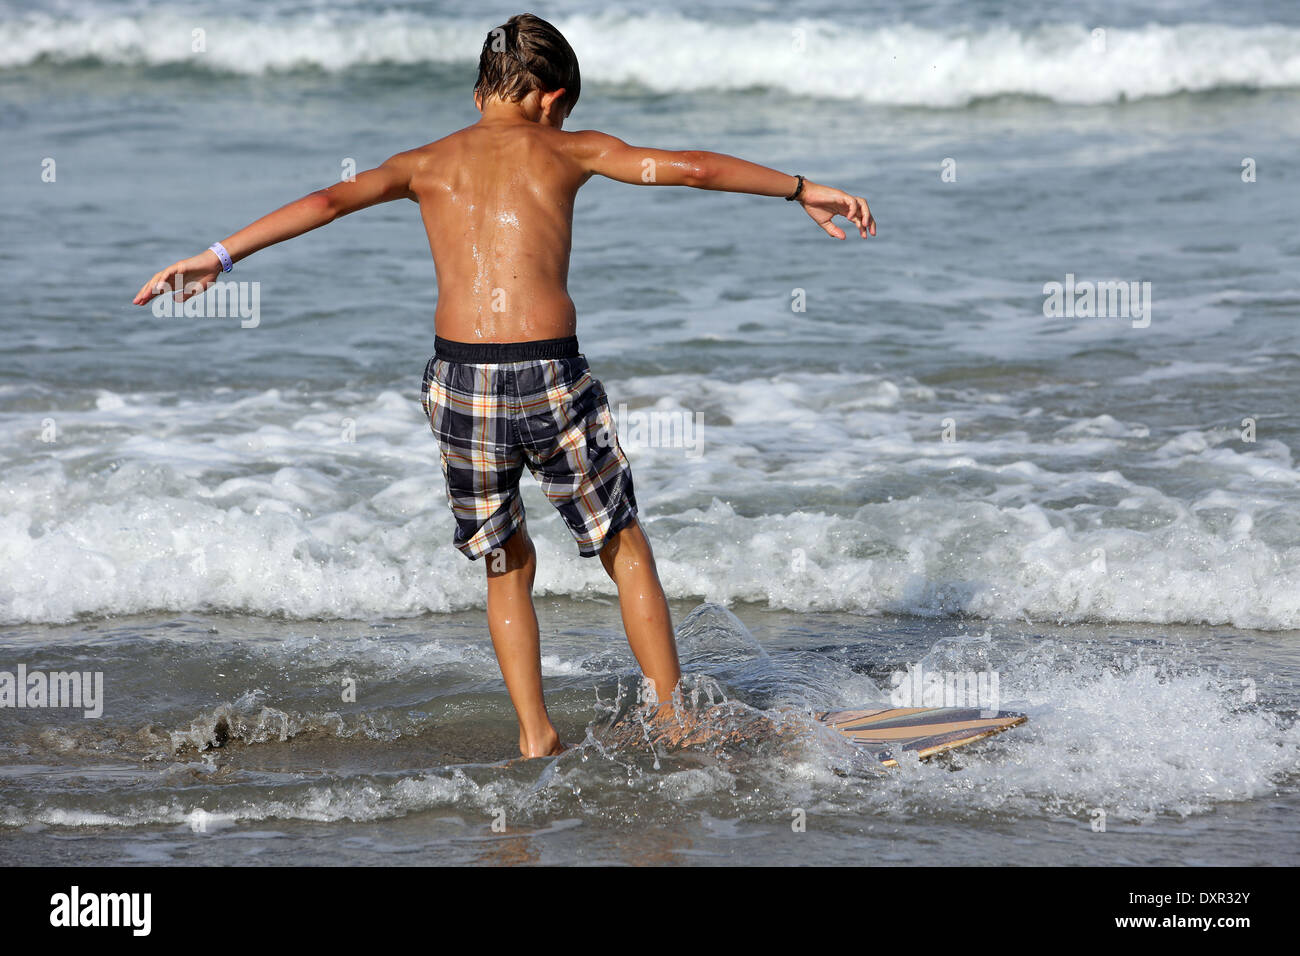 Cocoa Beach, Florida He practices surfing at the beach Stock Photo